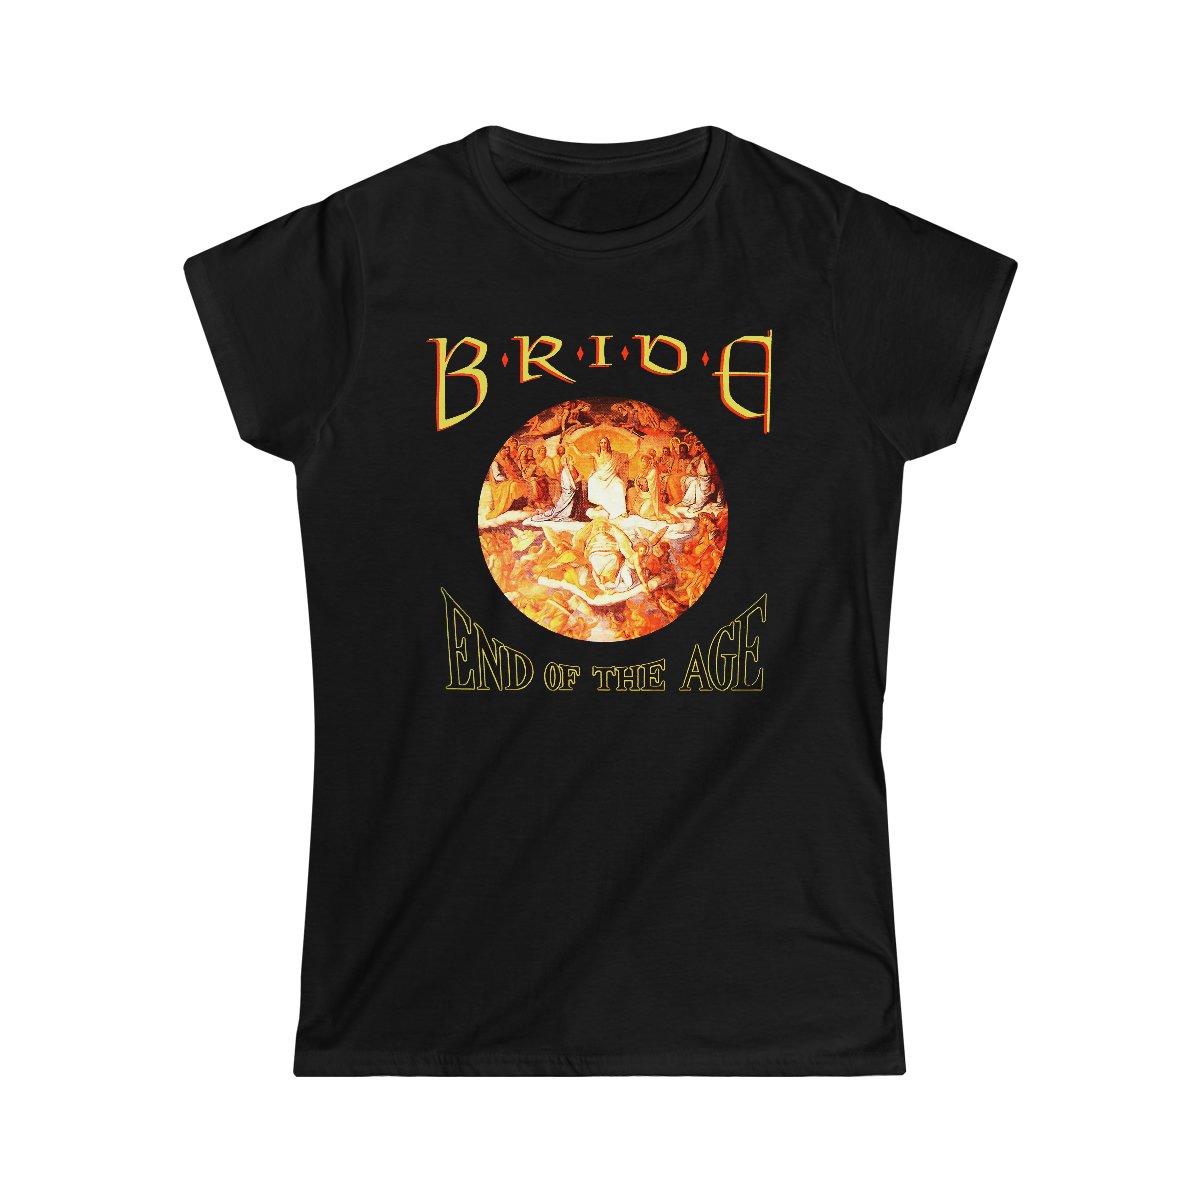 Bride – End of The Age Women’s Short Sleeve Tshirt 64000L